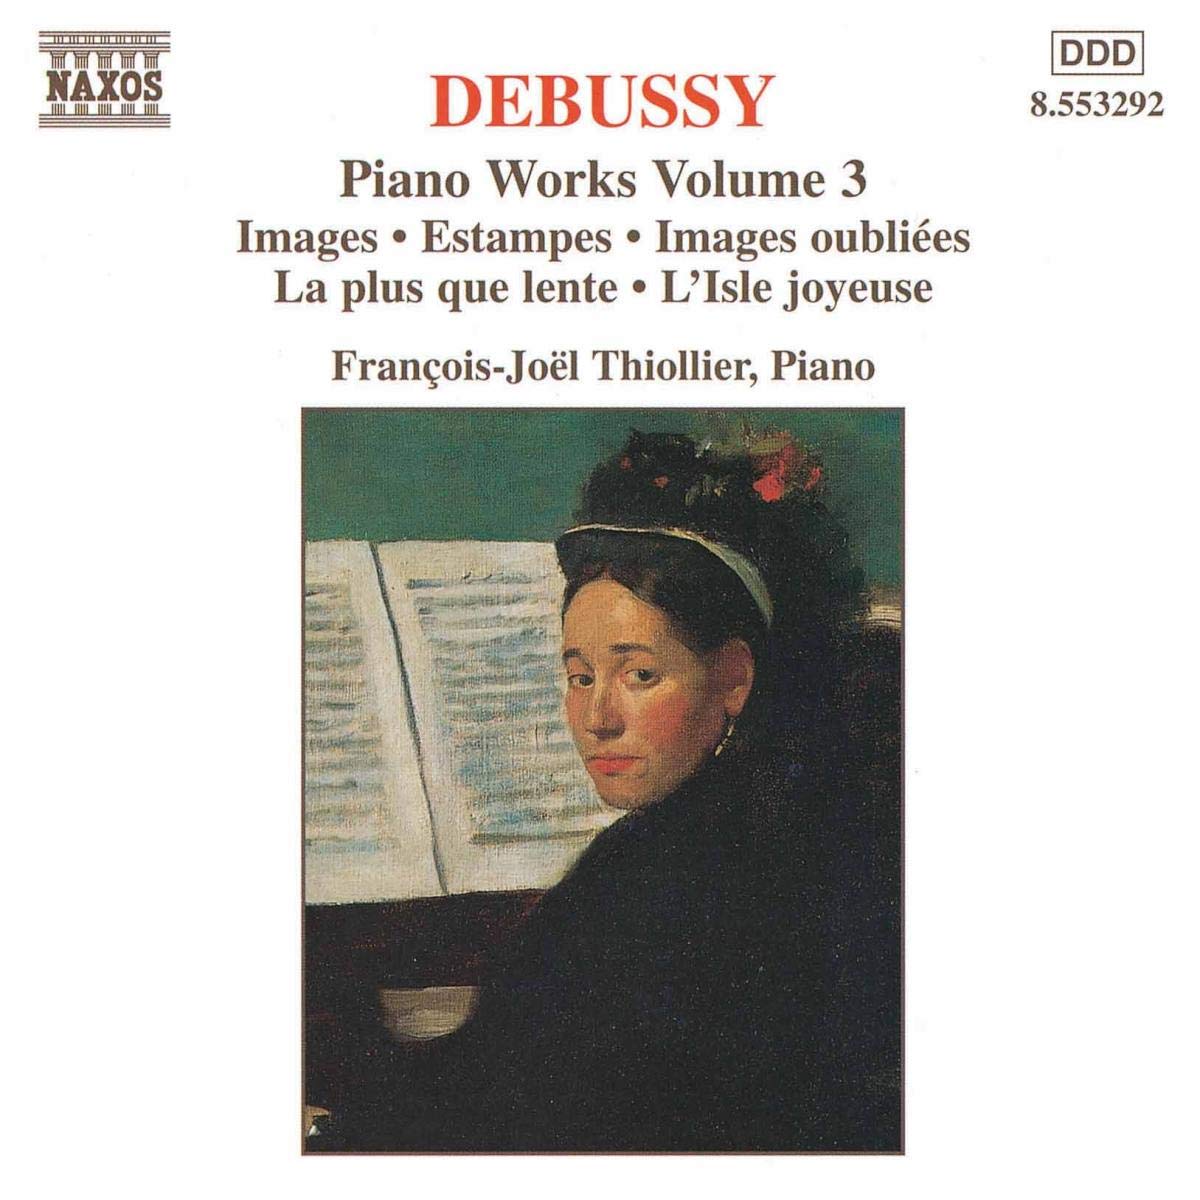 DEBUSSY: Piano Works vol. 3